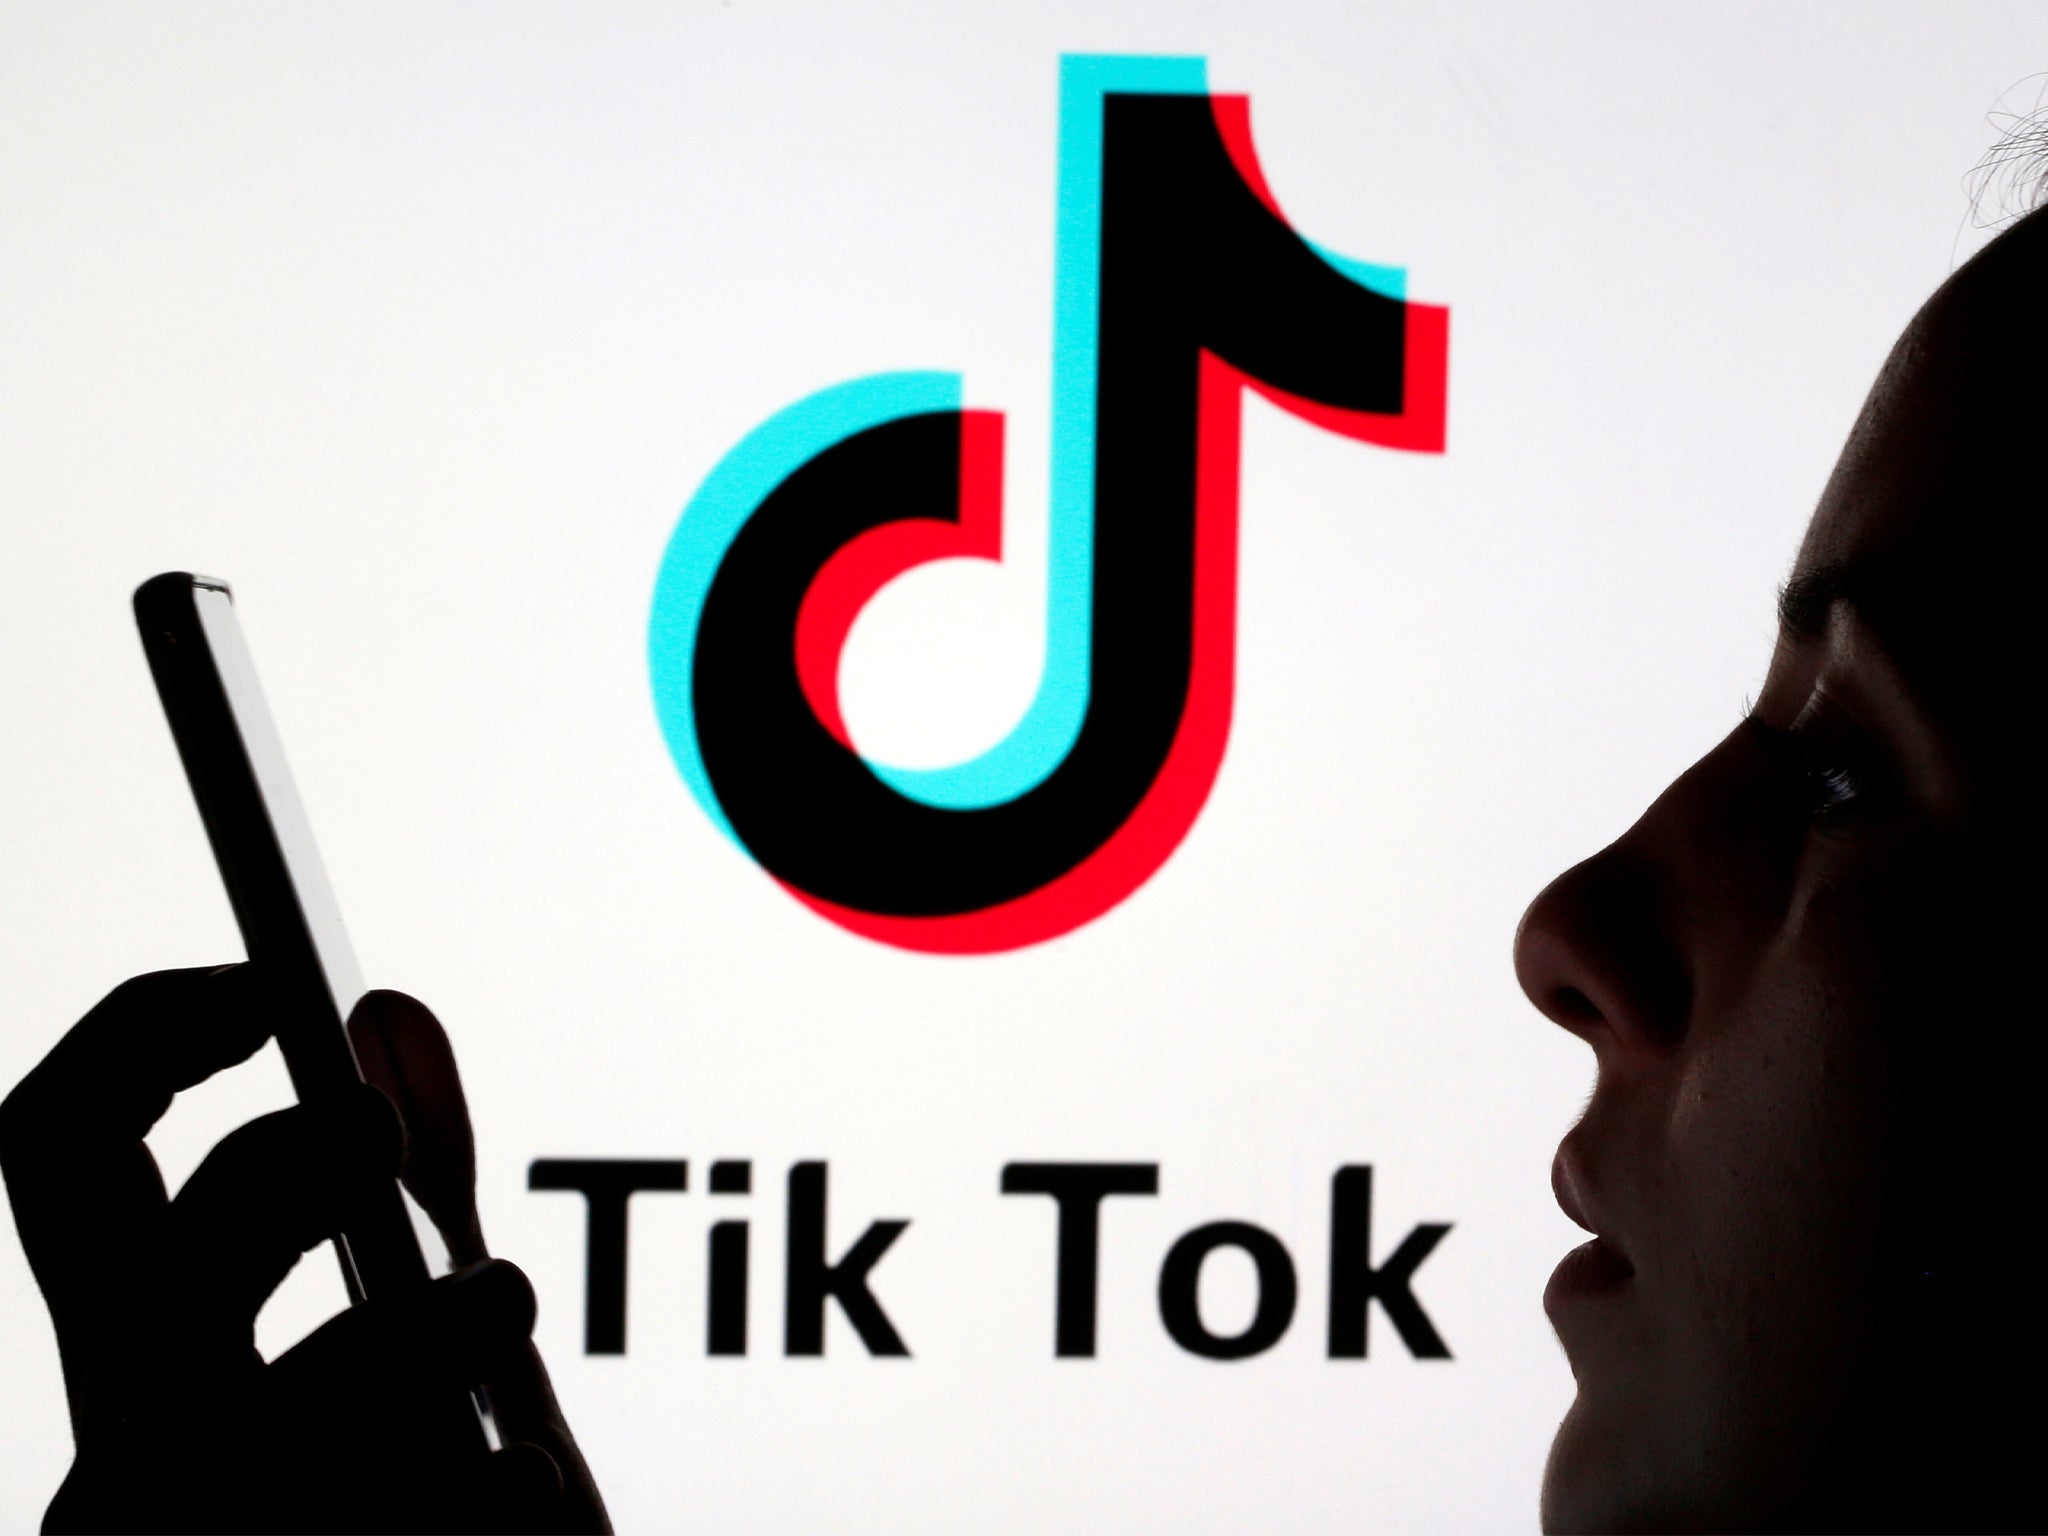 The watchdog first raised concerns with TikTok in December over failure to protect minors